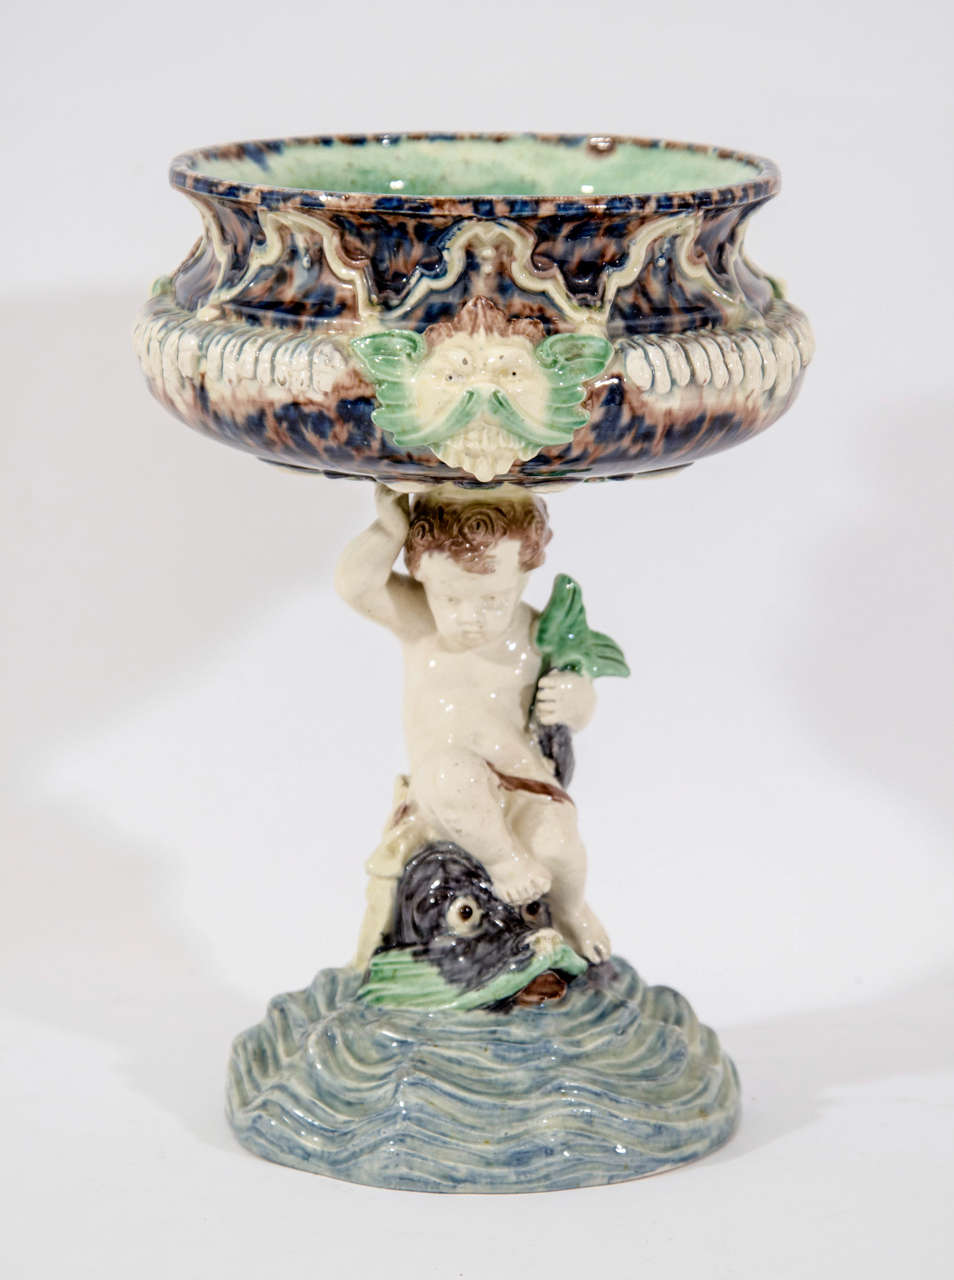 French Majolica Tazza on Cherub and Dolphin Pedestal in Green, Blue, and Cream Tones by Thomas Sergent.  France, c. 1880

8 inches diameter x 10 inches high